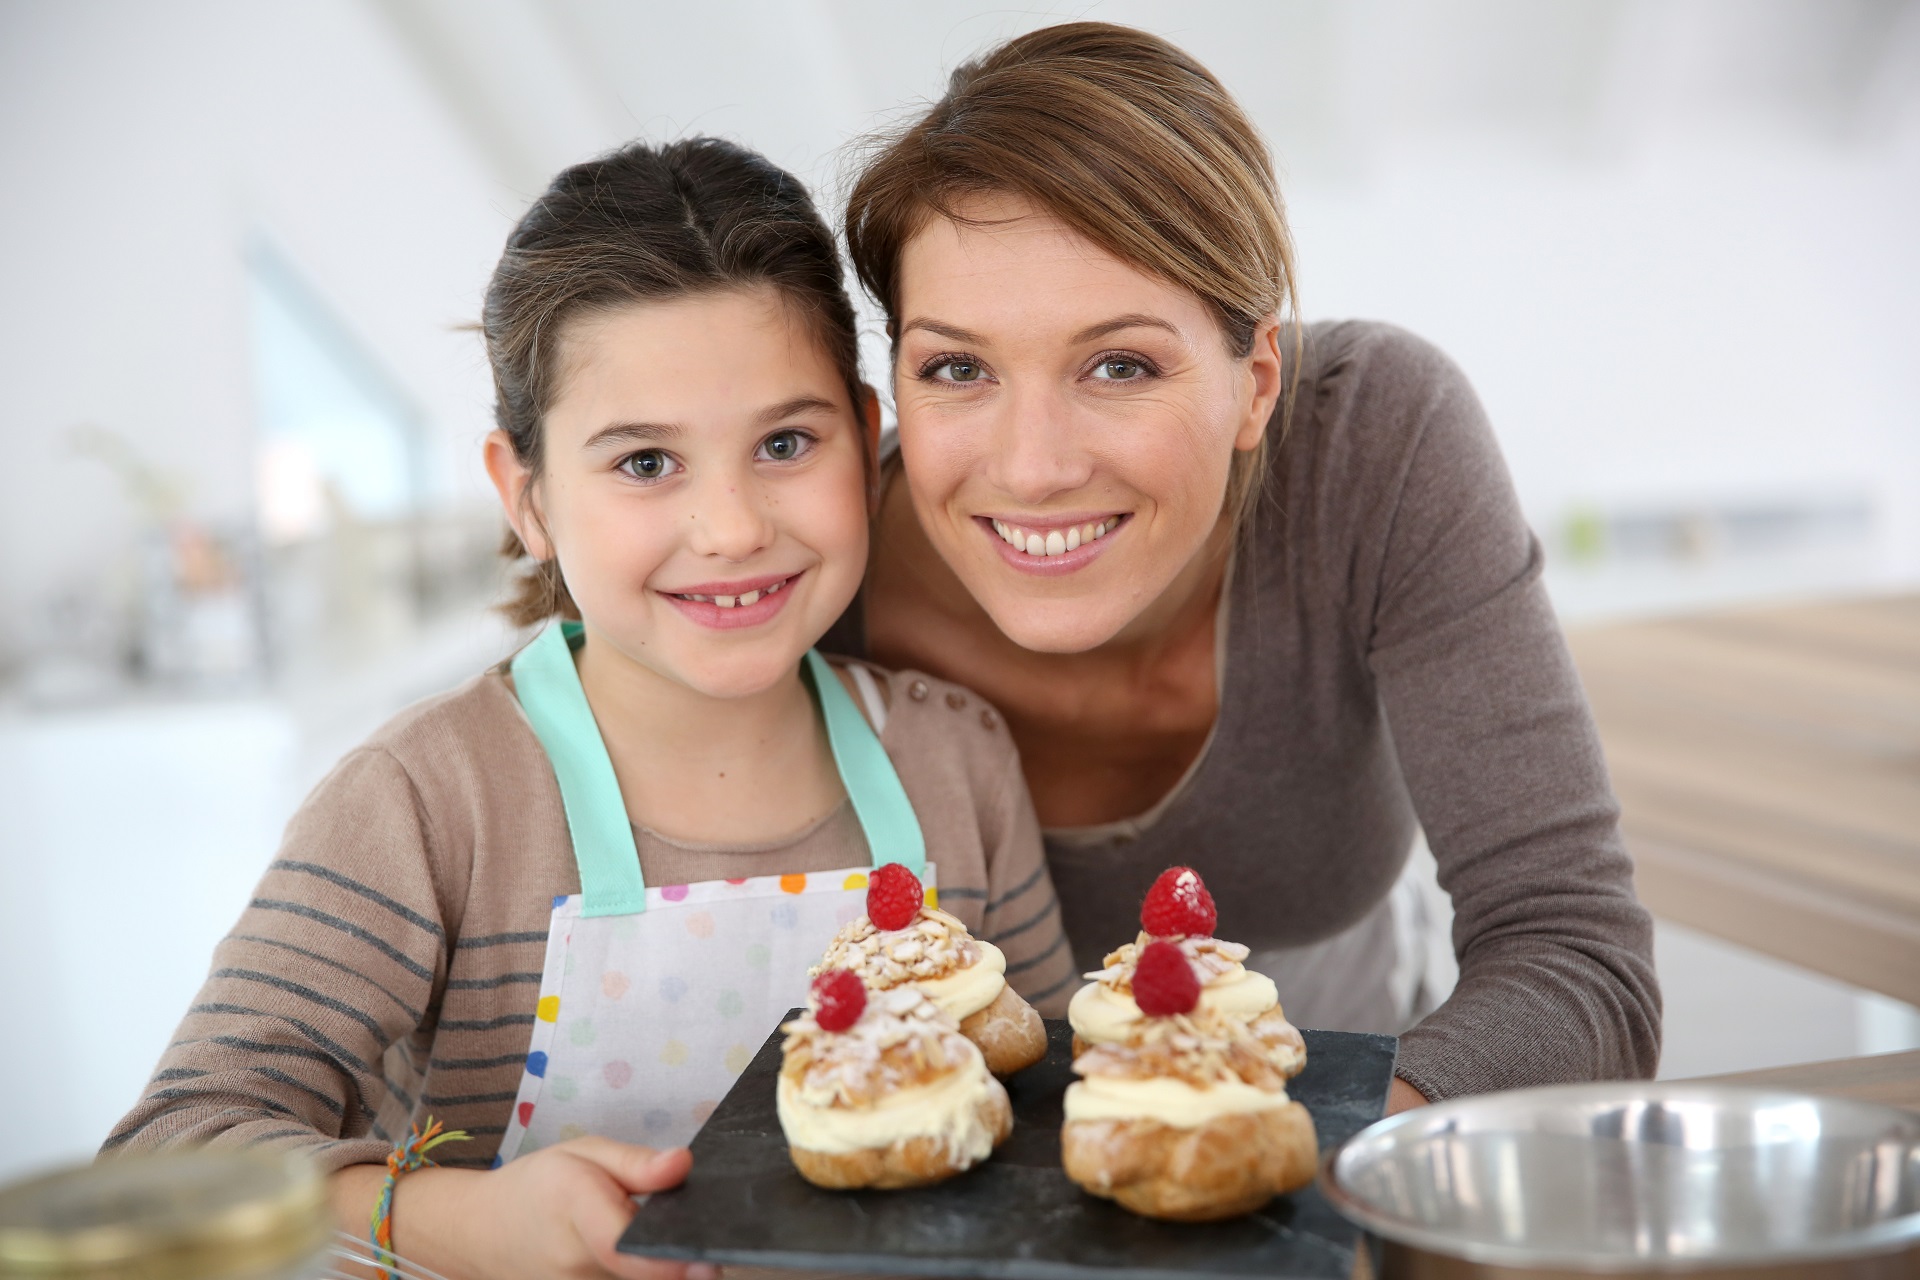 Mothers and women working from home can start a home food business on the side. 